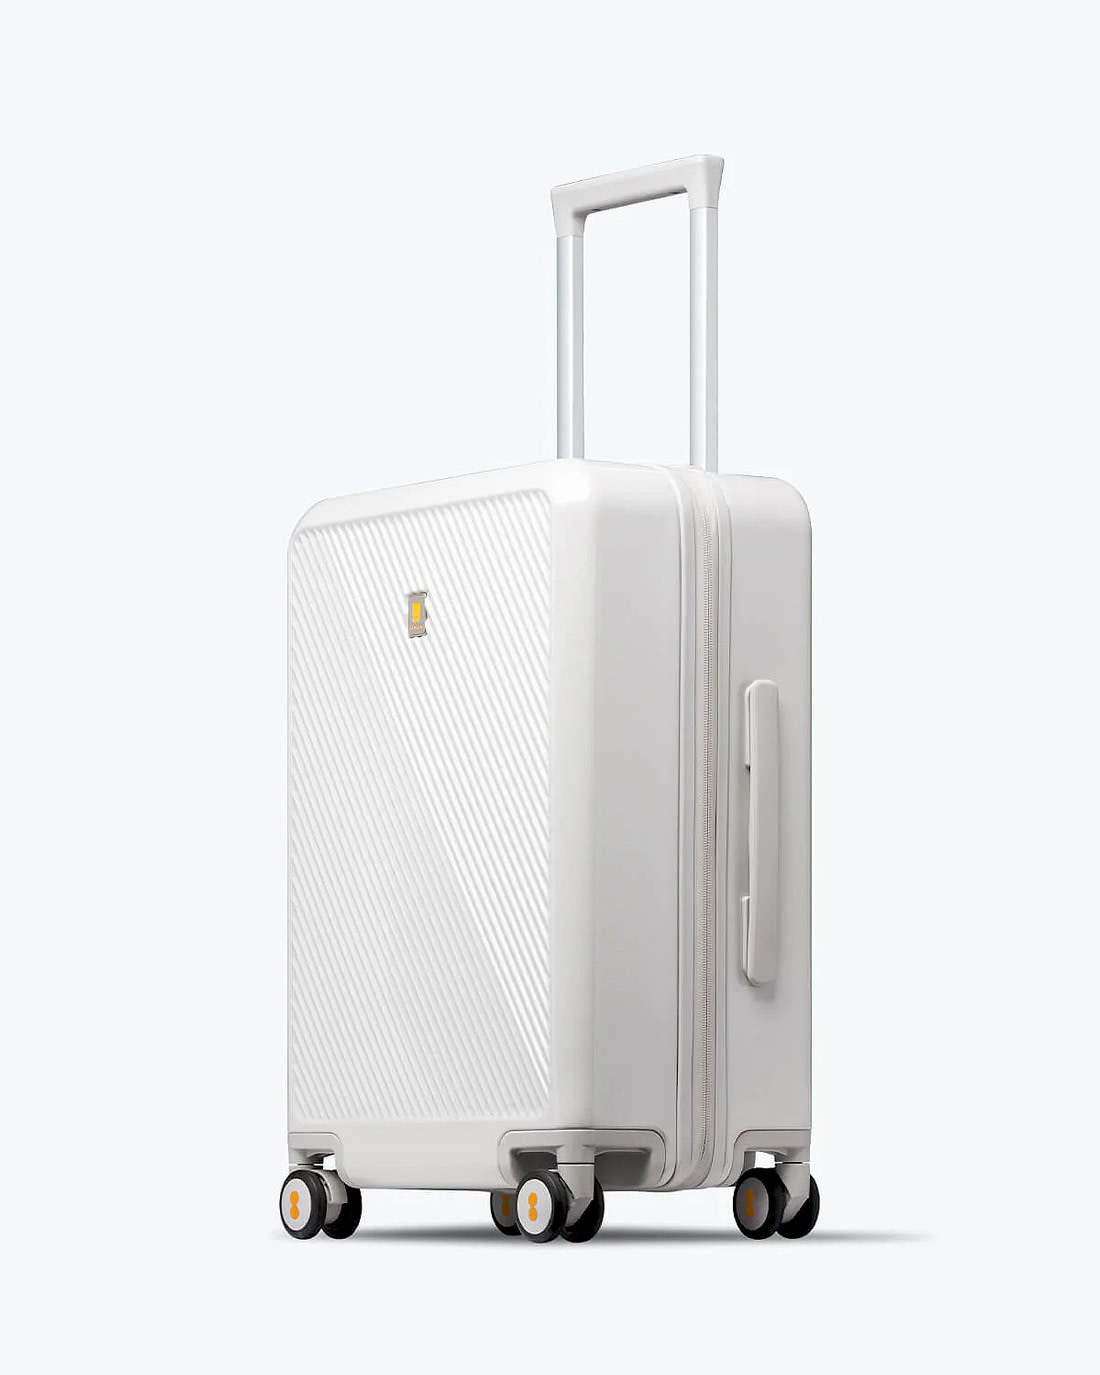 BEST SELLING IN CARRY-ON LUGGAGE